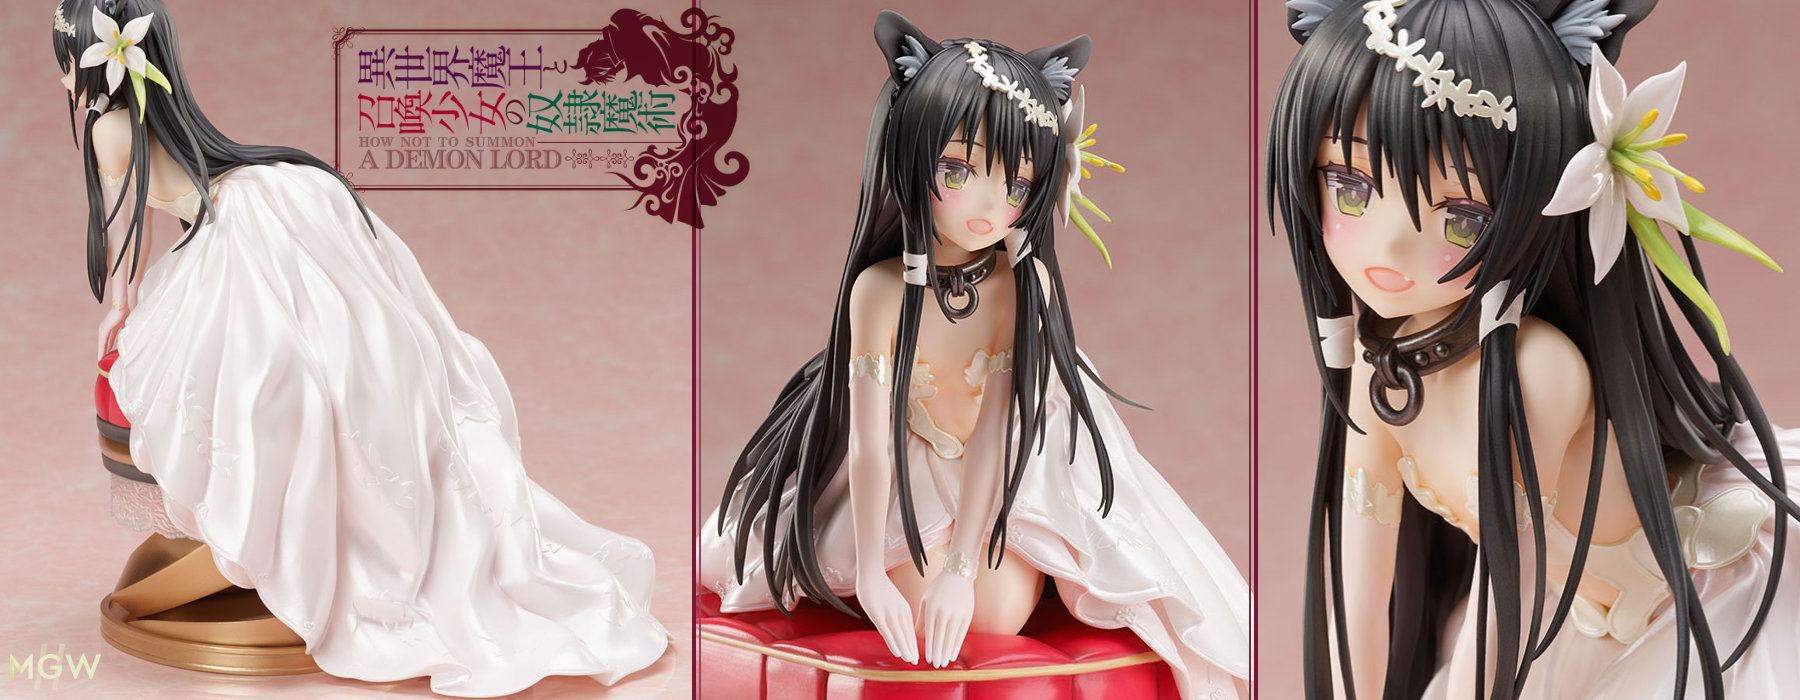 Rem Galleu Wedding Dress by FuRyu from How NOT to Summon a Demon Lord MGW Anime Figure Guide